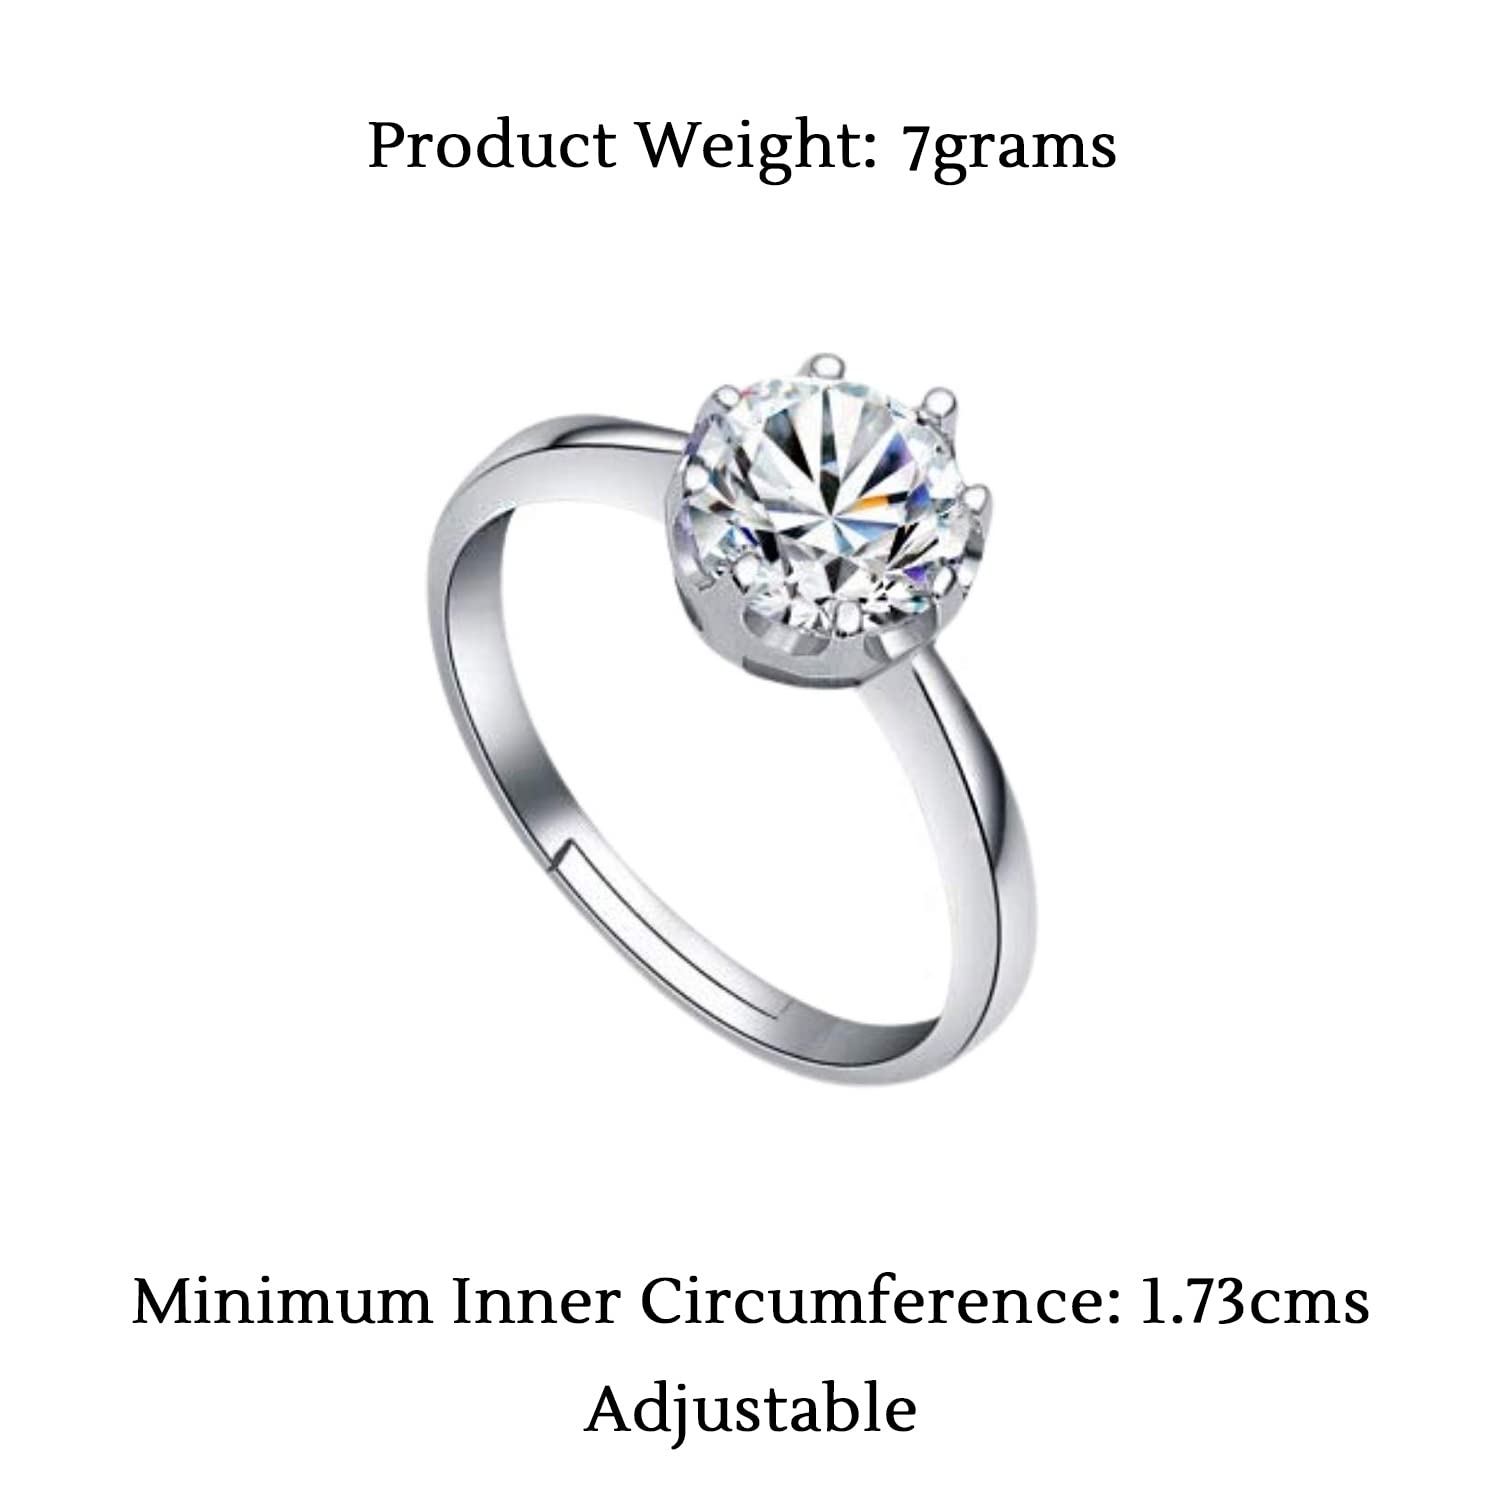 Adjustable Silver Rings Couple Hug for Women Mother Grandmother Wife  Girlfriend Female Lover - 2pcs : Amazon.in: Jewellery